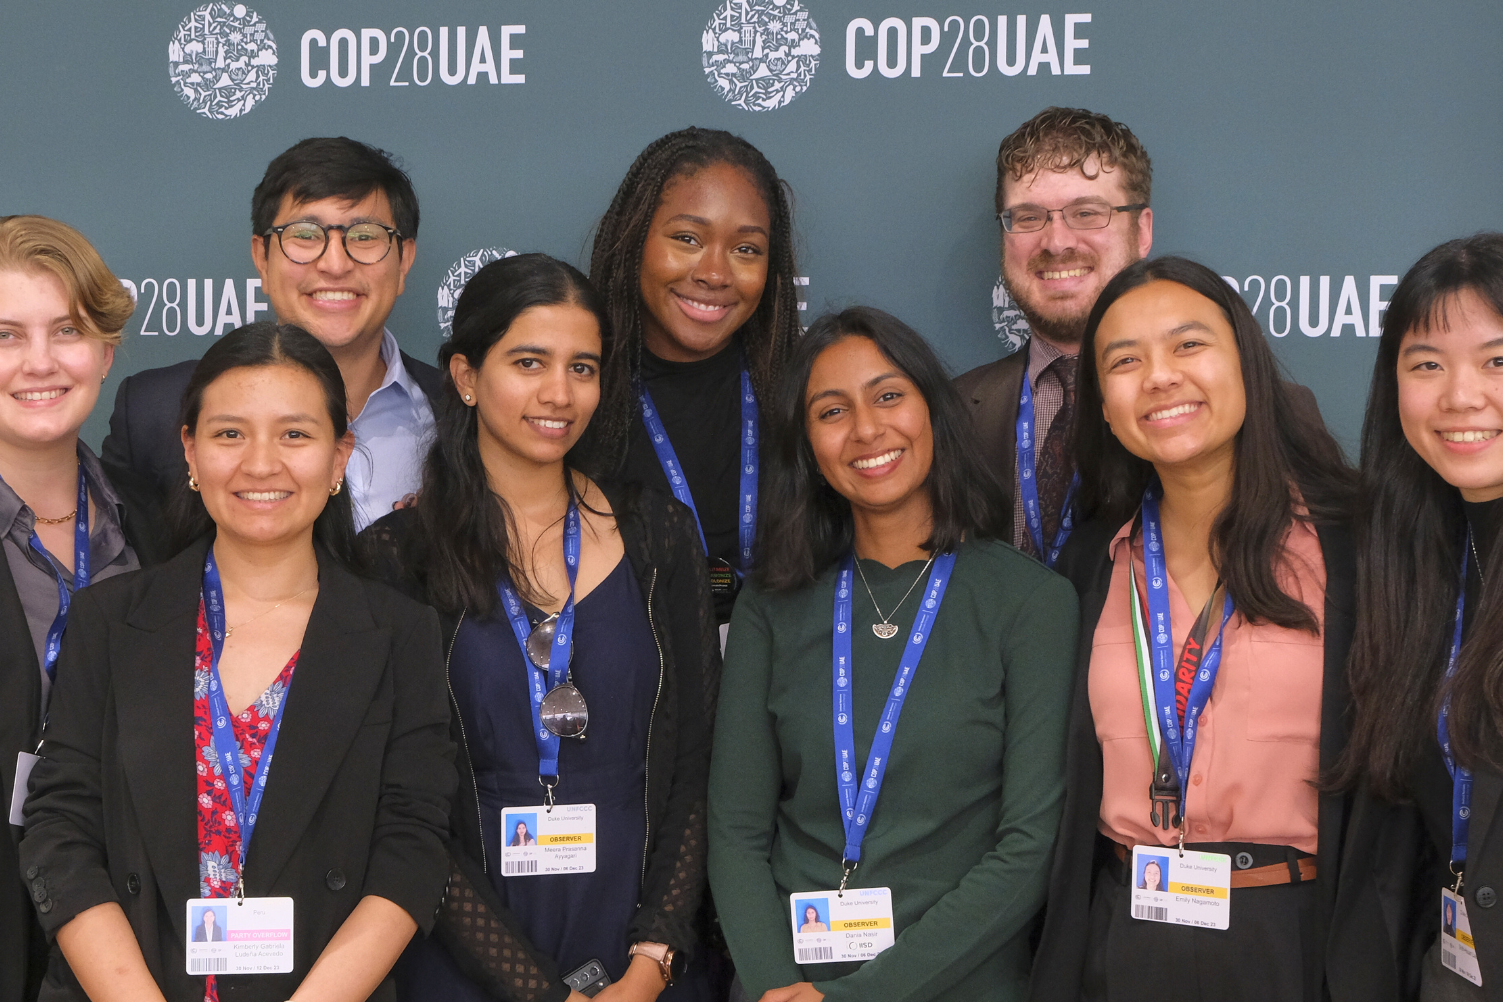 Duke students smiling in front of COP28UAE backdrop.